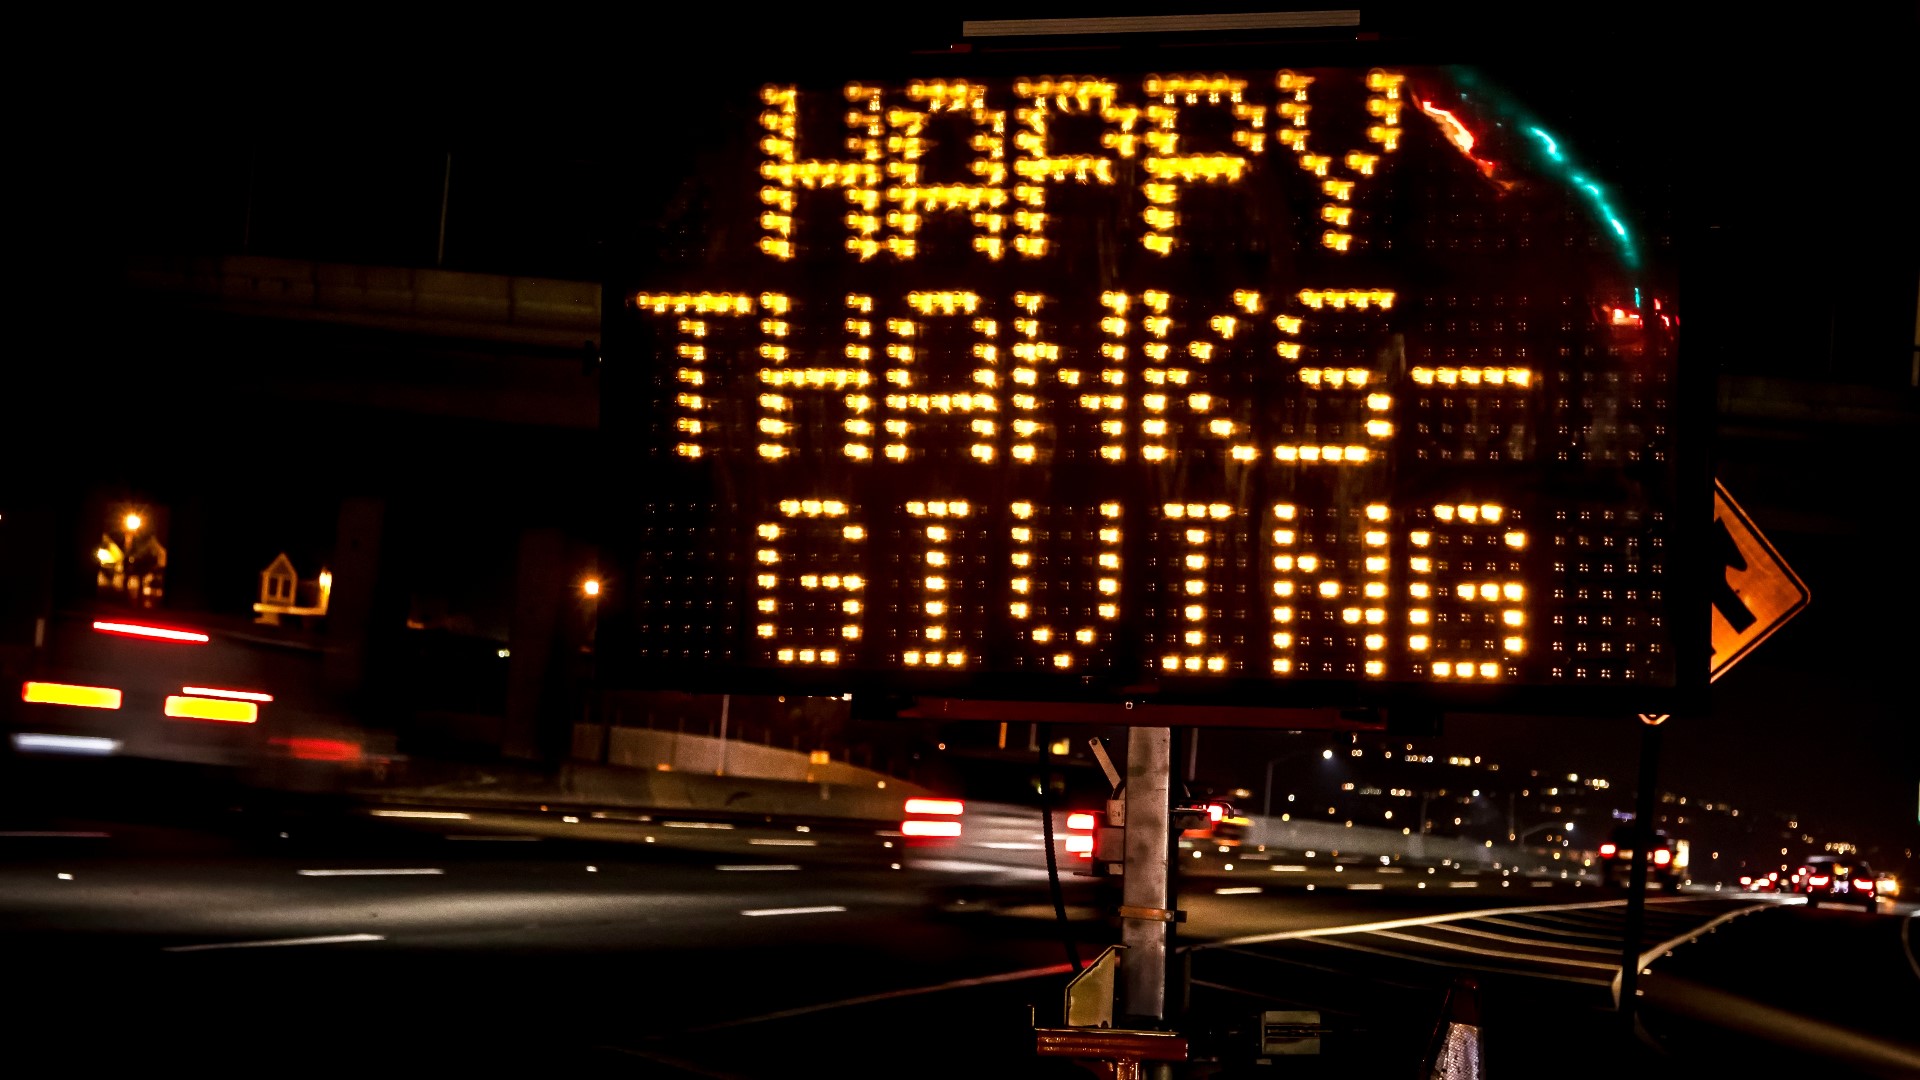 AAA is expecting this year to be the third busiest Thanksgiving travel season in over 20 years.